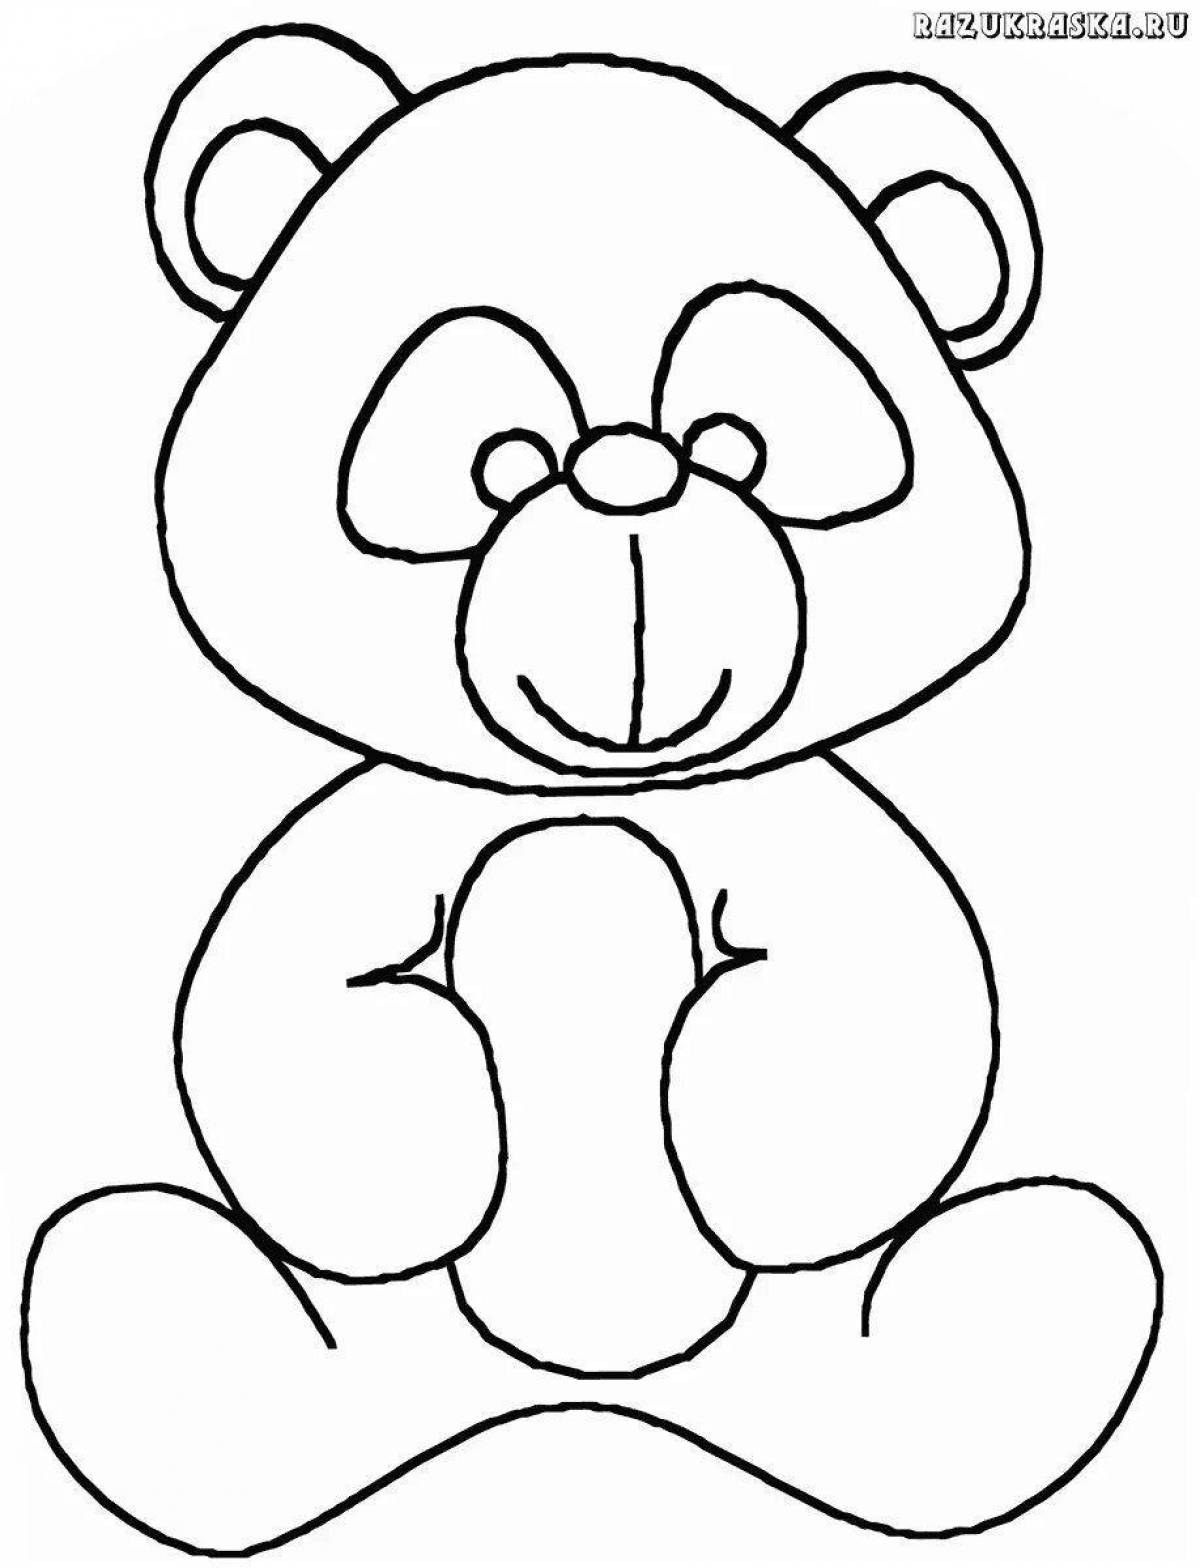 Coloring page festive olympic bear